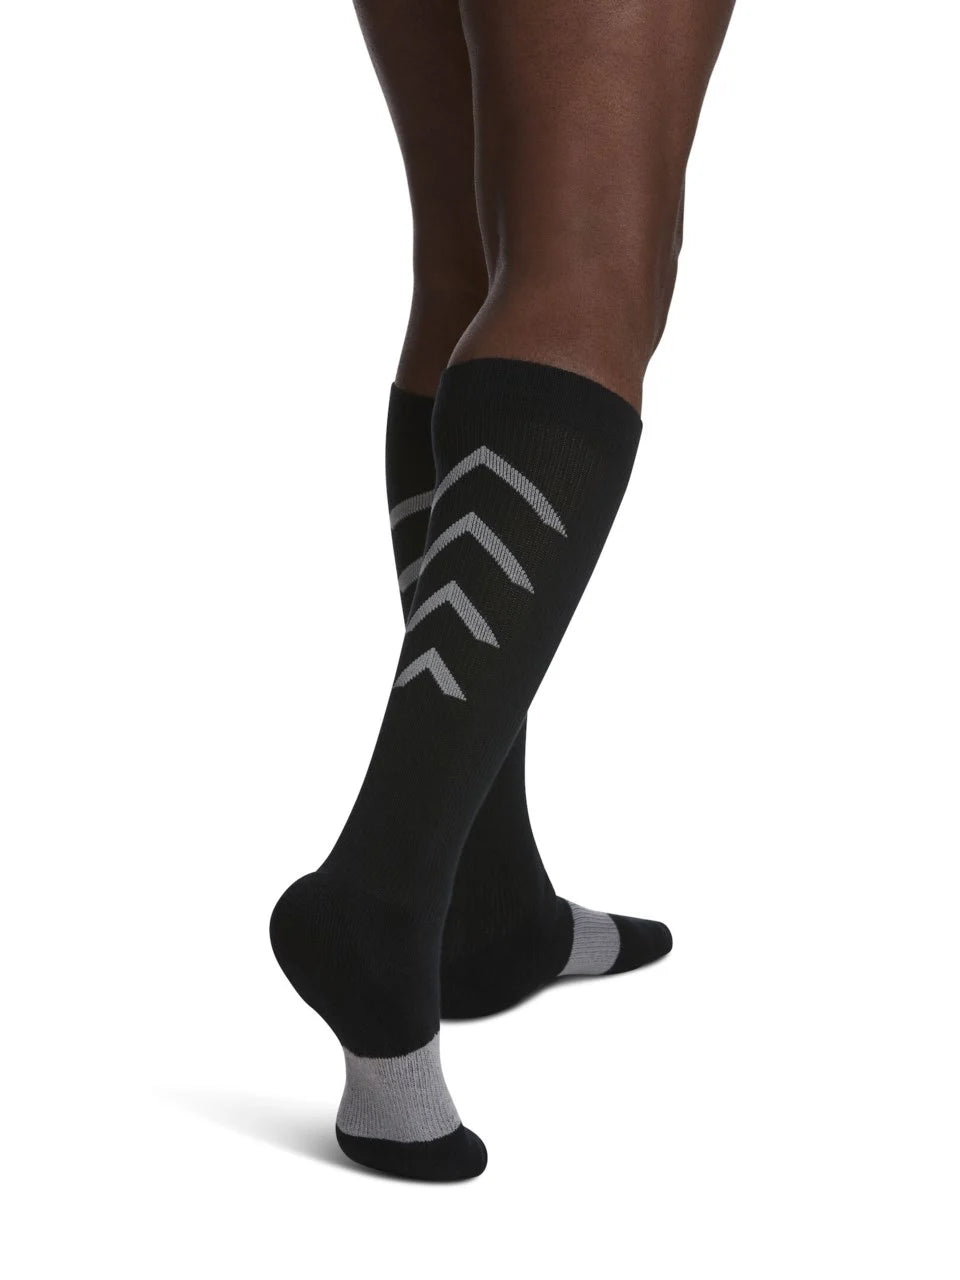 Athletic Recovery Socks